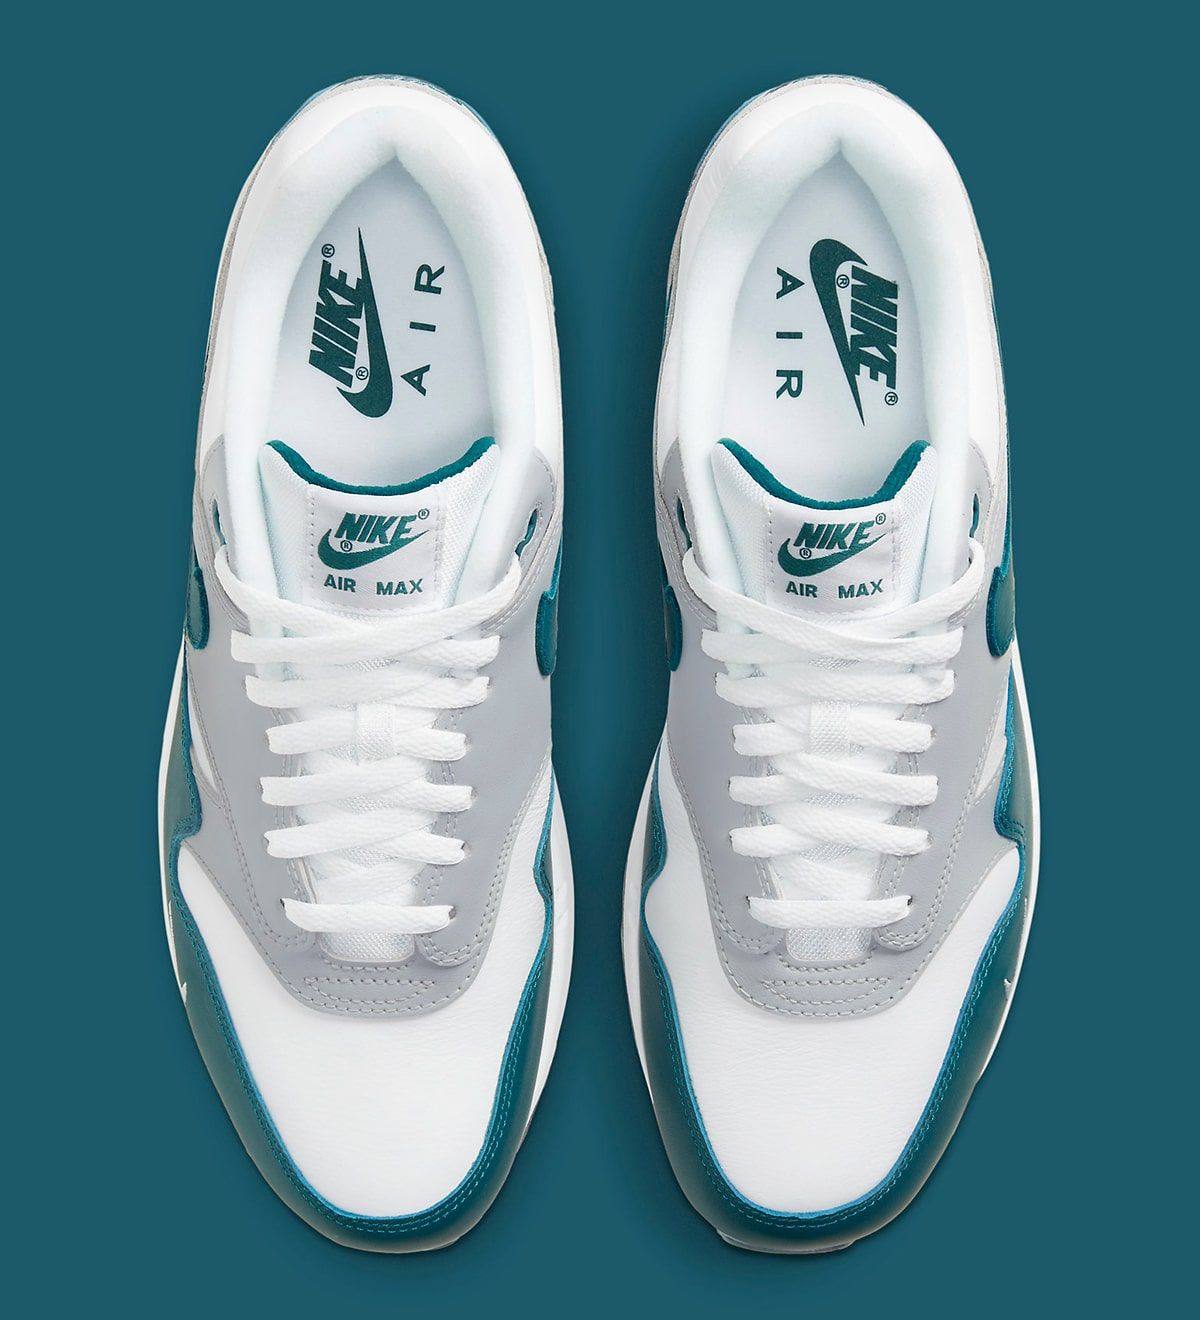 Air Max 1 “Dark Teal Green” Confirmed for April 15th Release